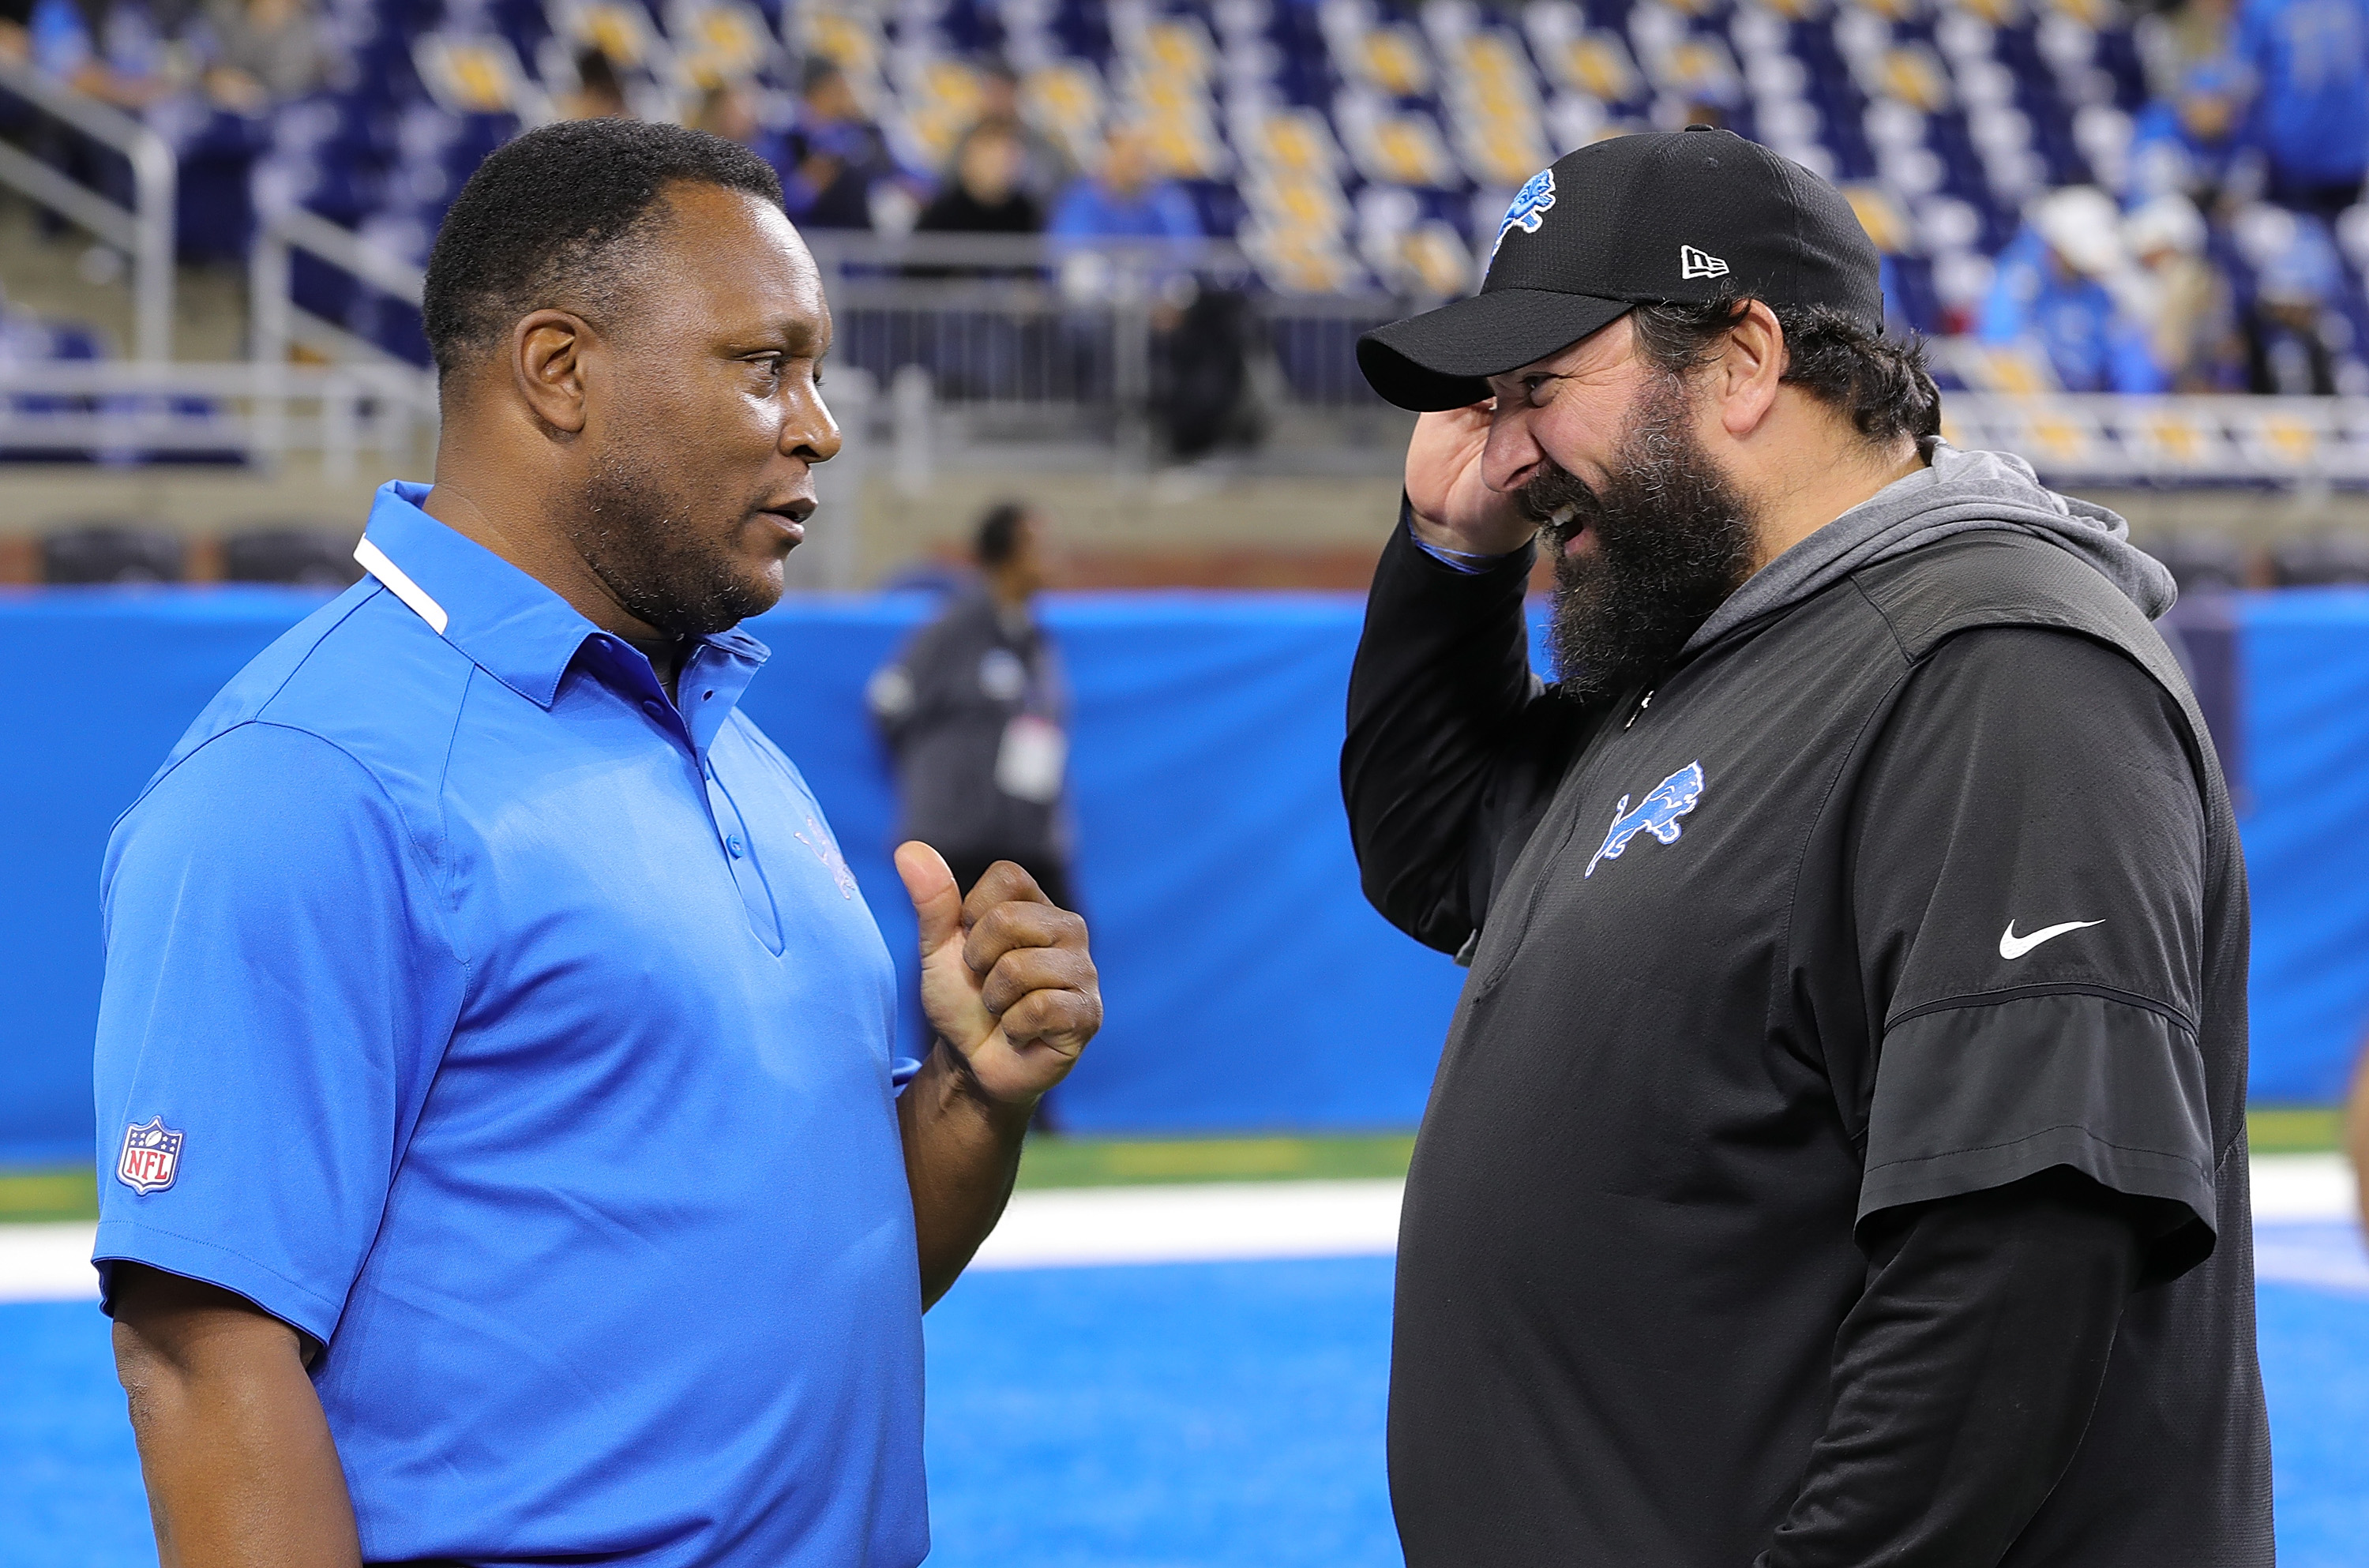 Barry Sanders will help Detroit Lions search for new GM, coach